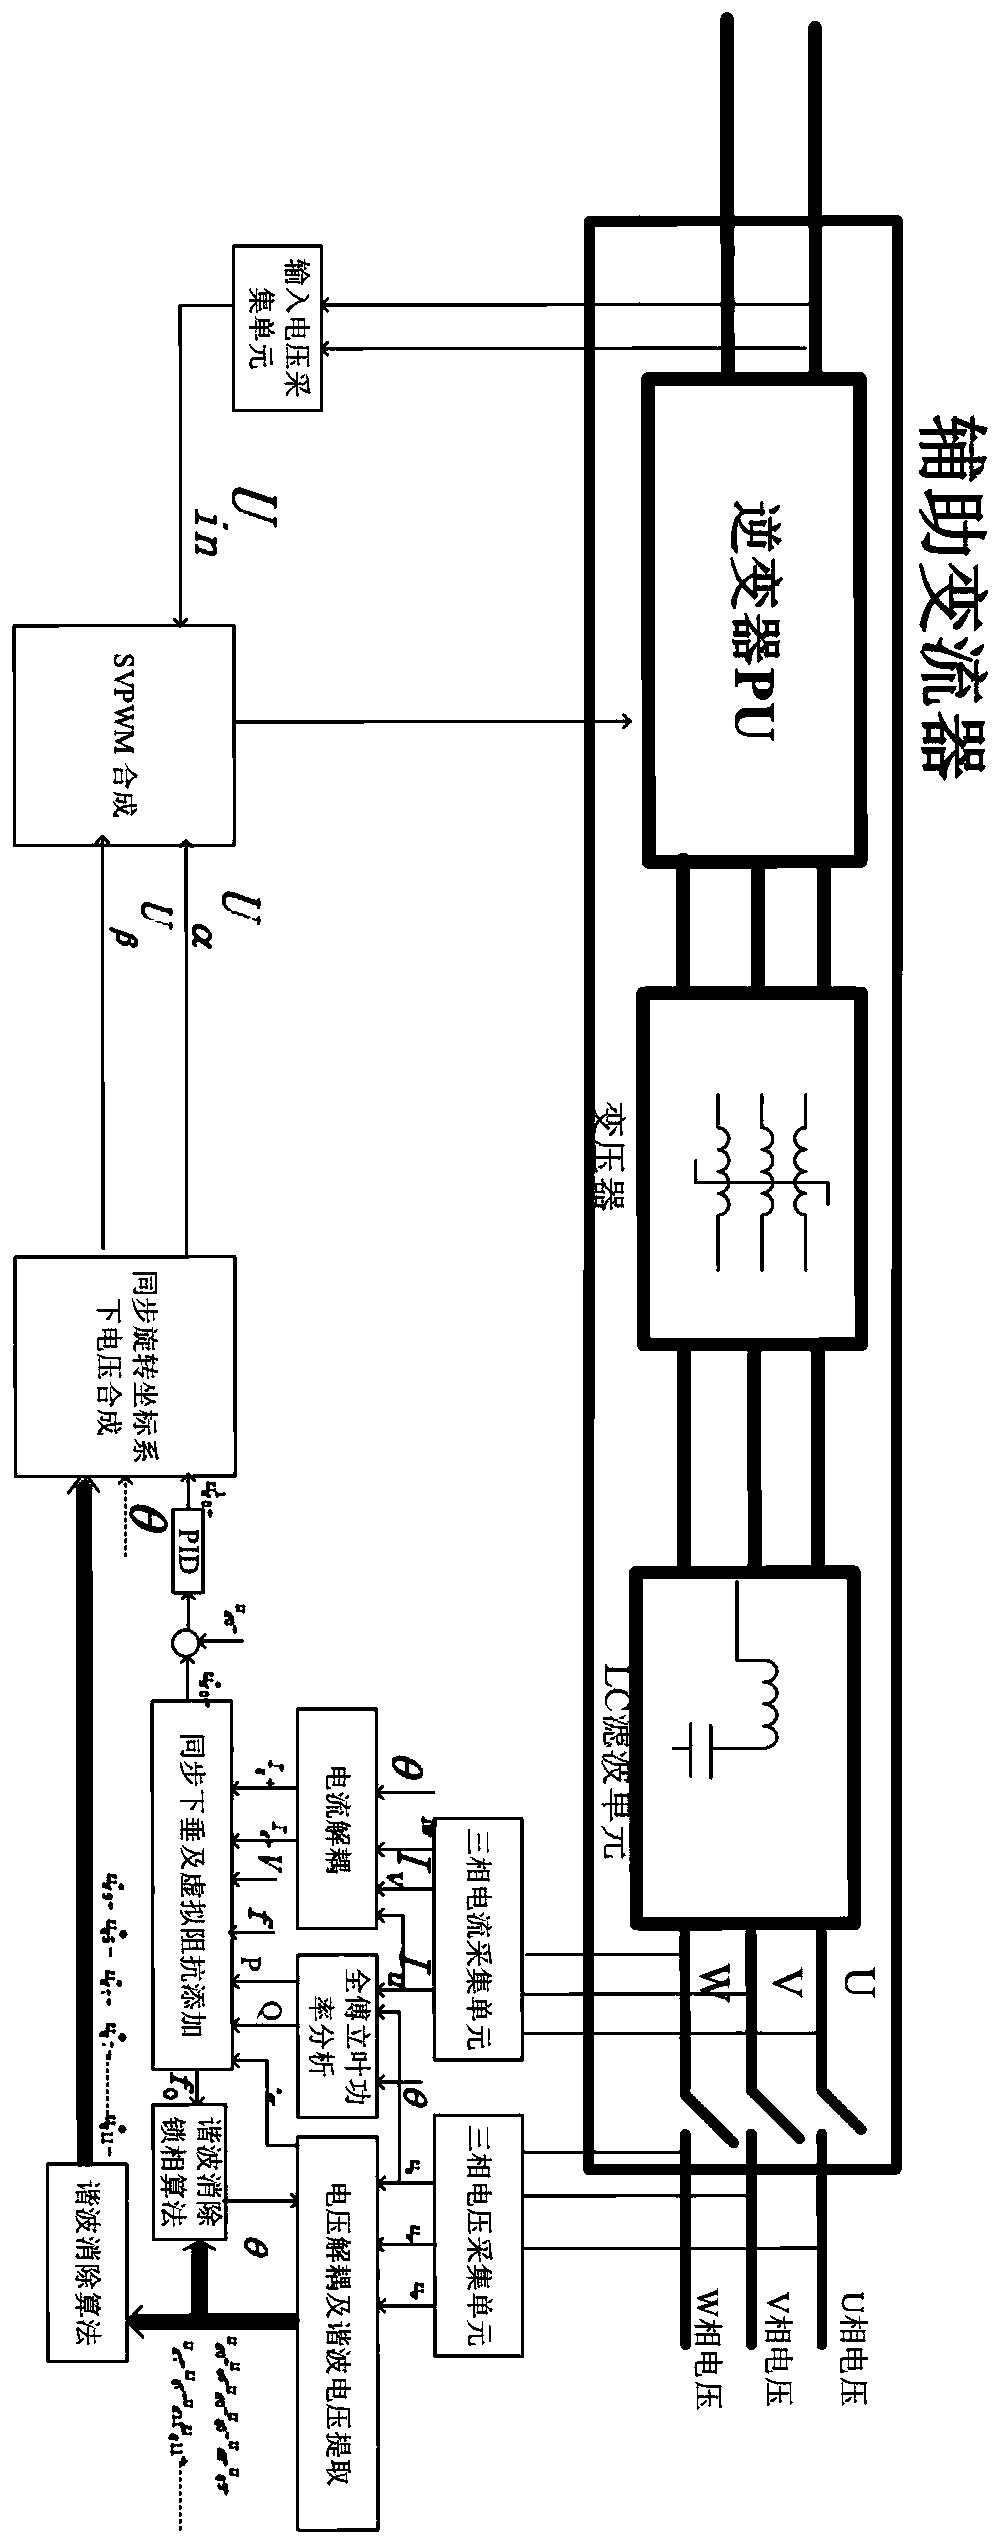 A control system and control method for a converter parallel system